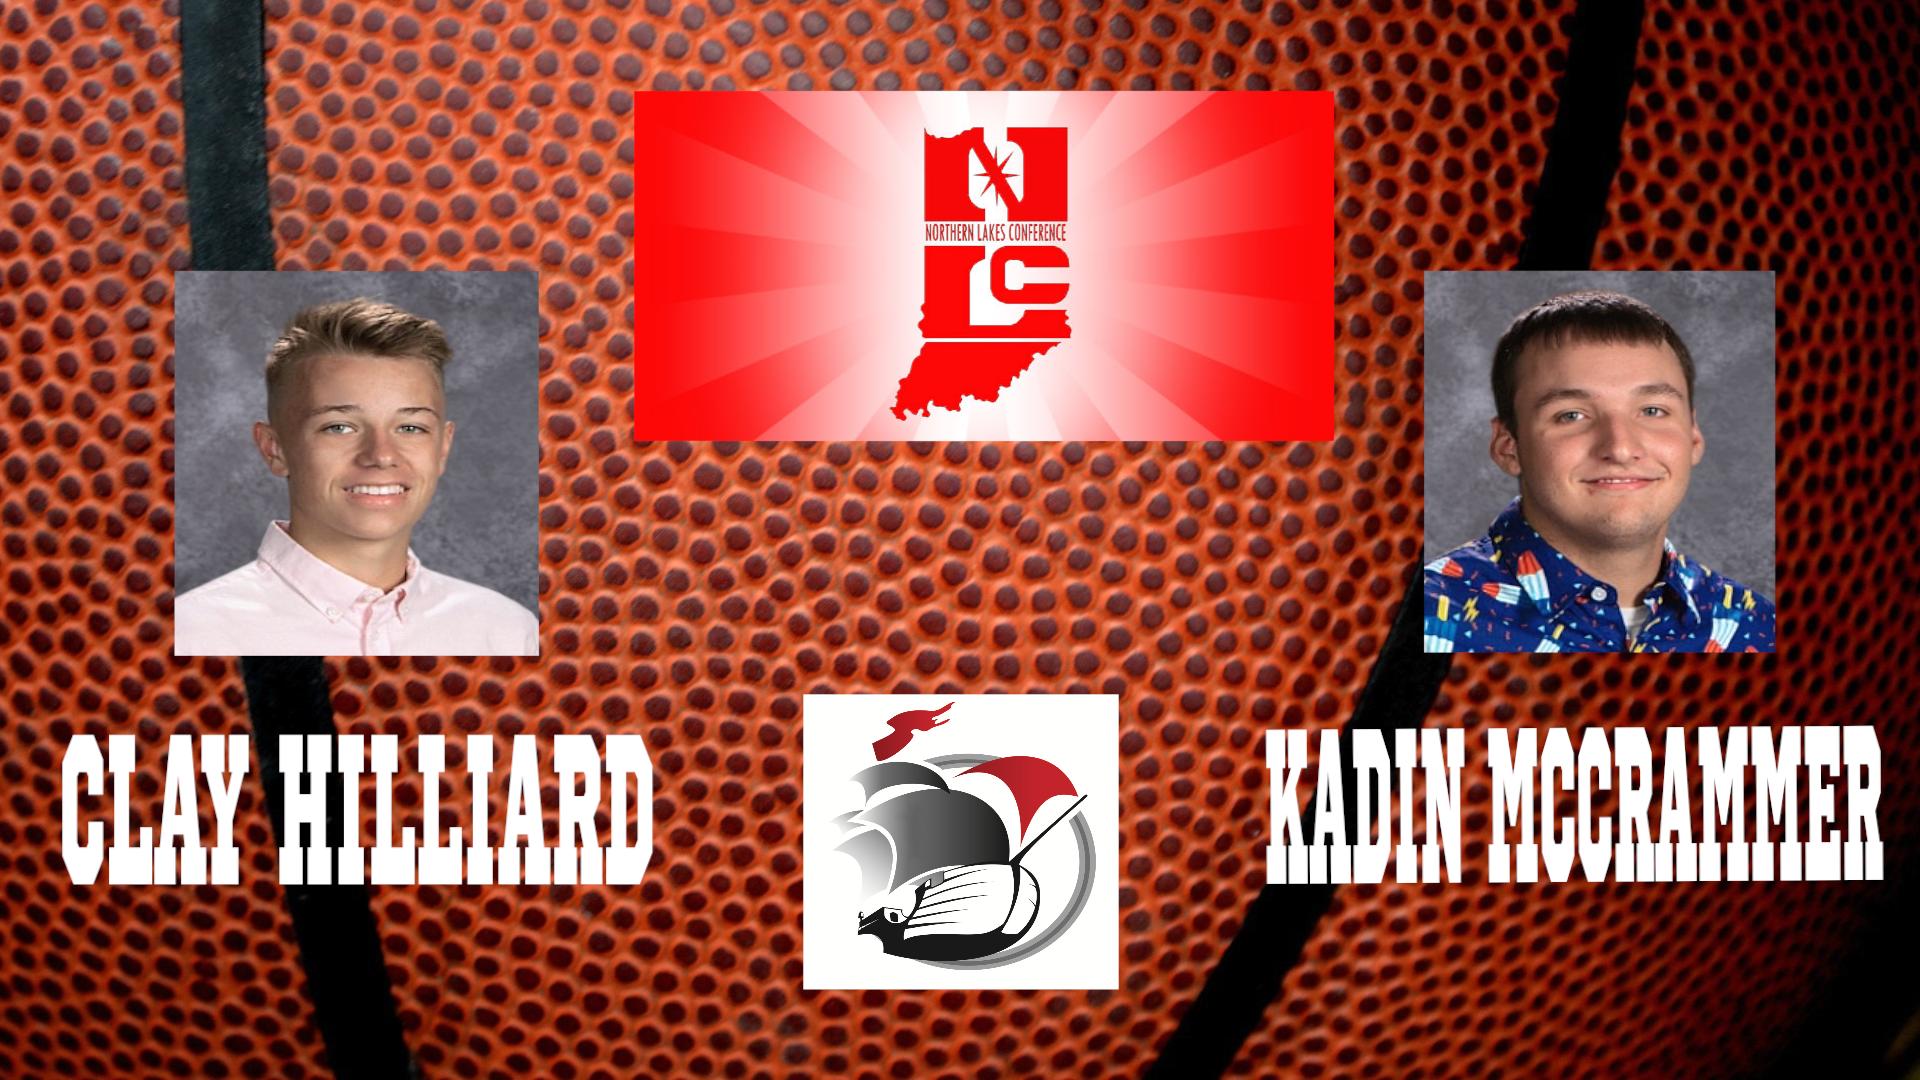 Northern Lakes Conference Clay Hilliard and Kadin McCrammer